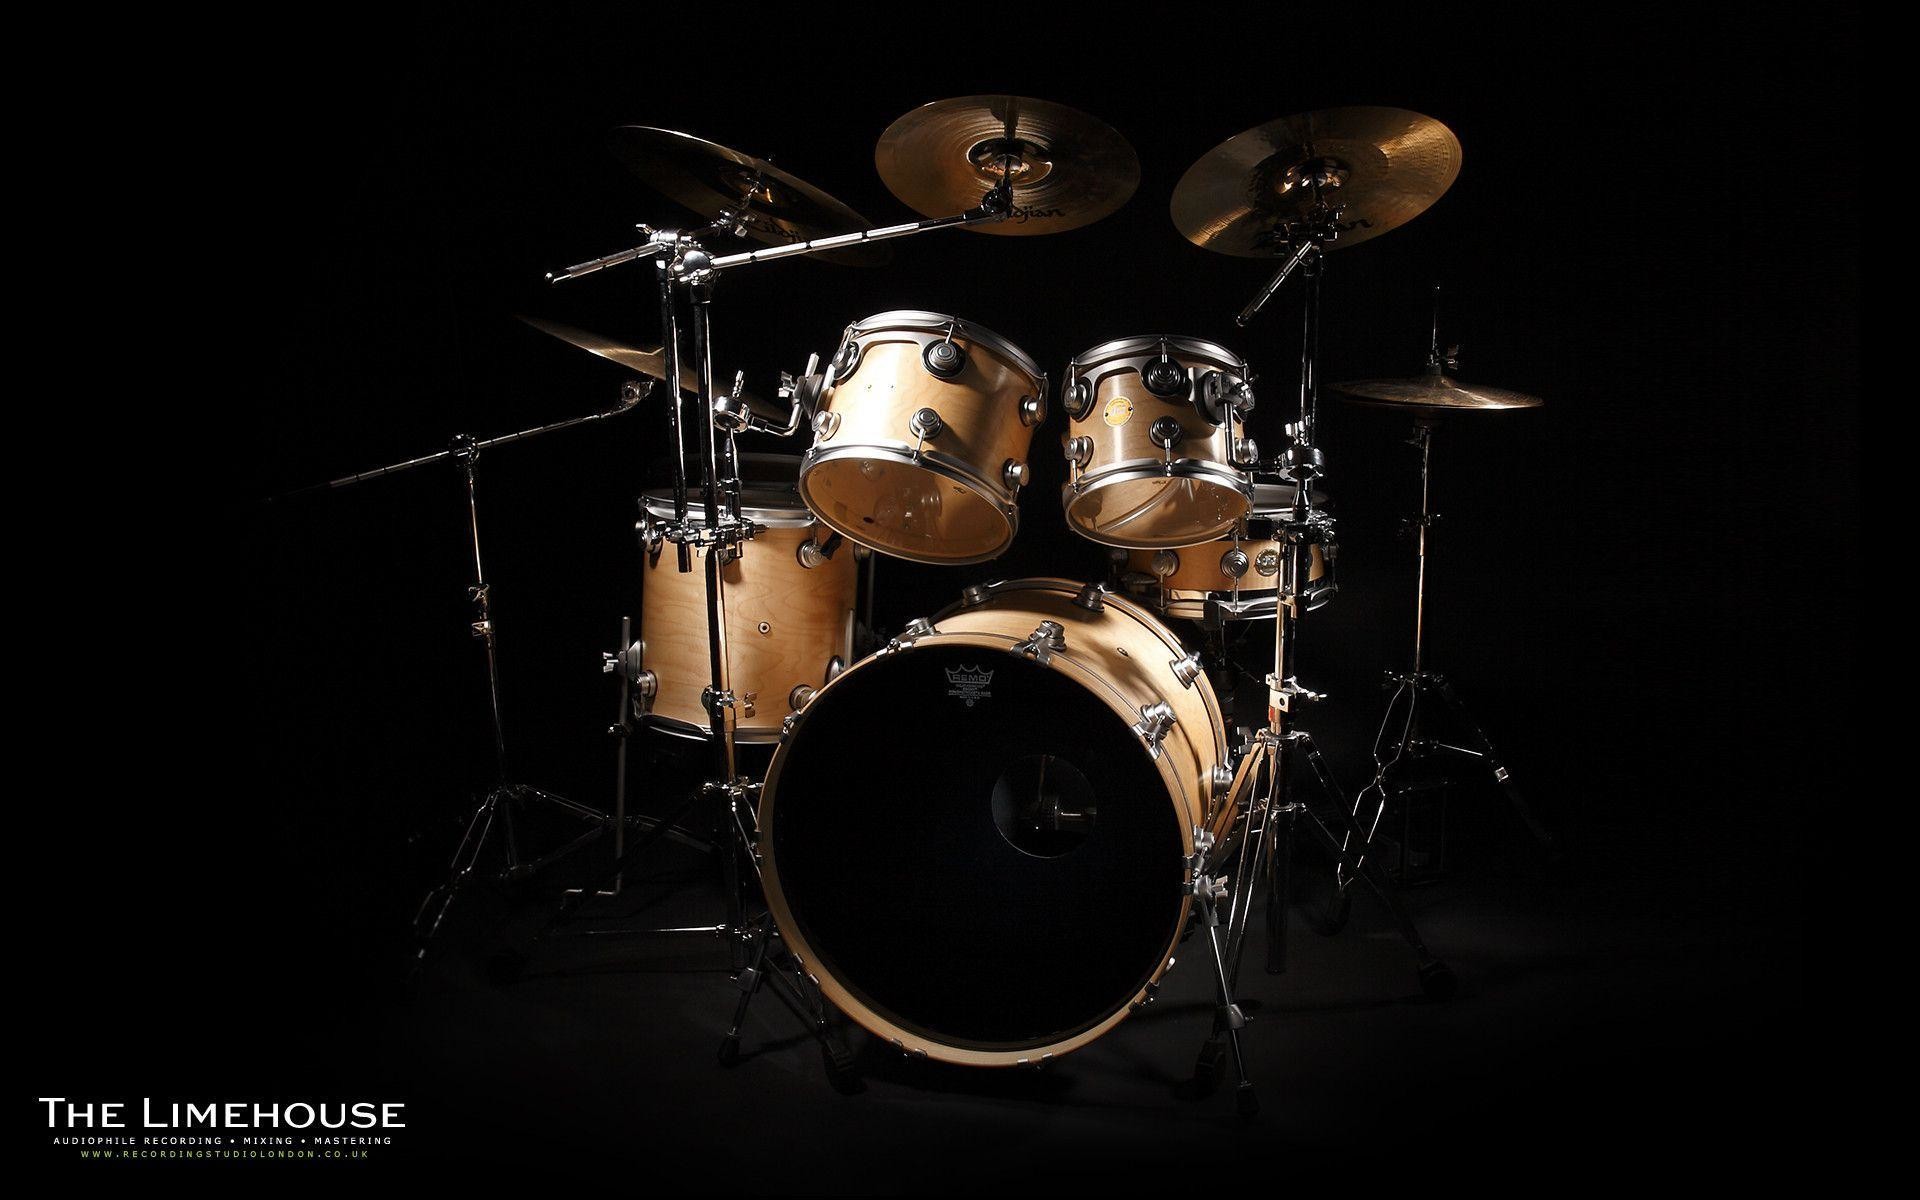 1920x1200 Drum Kit Wallpapers Images & Pictures - Becuo